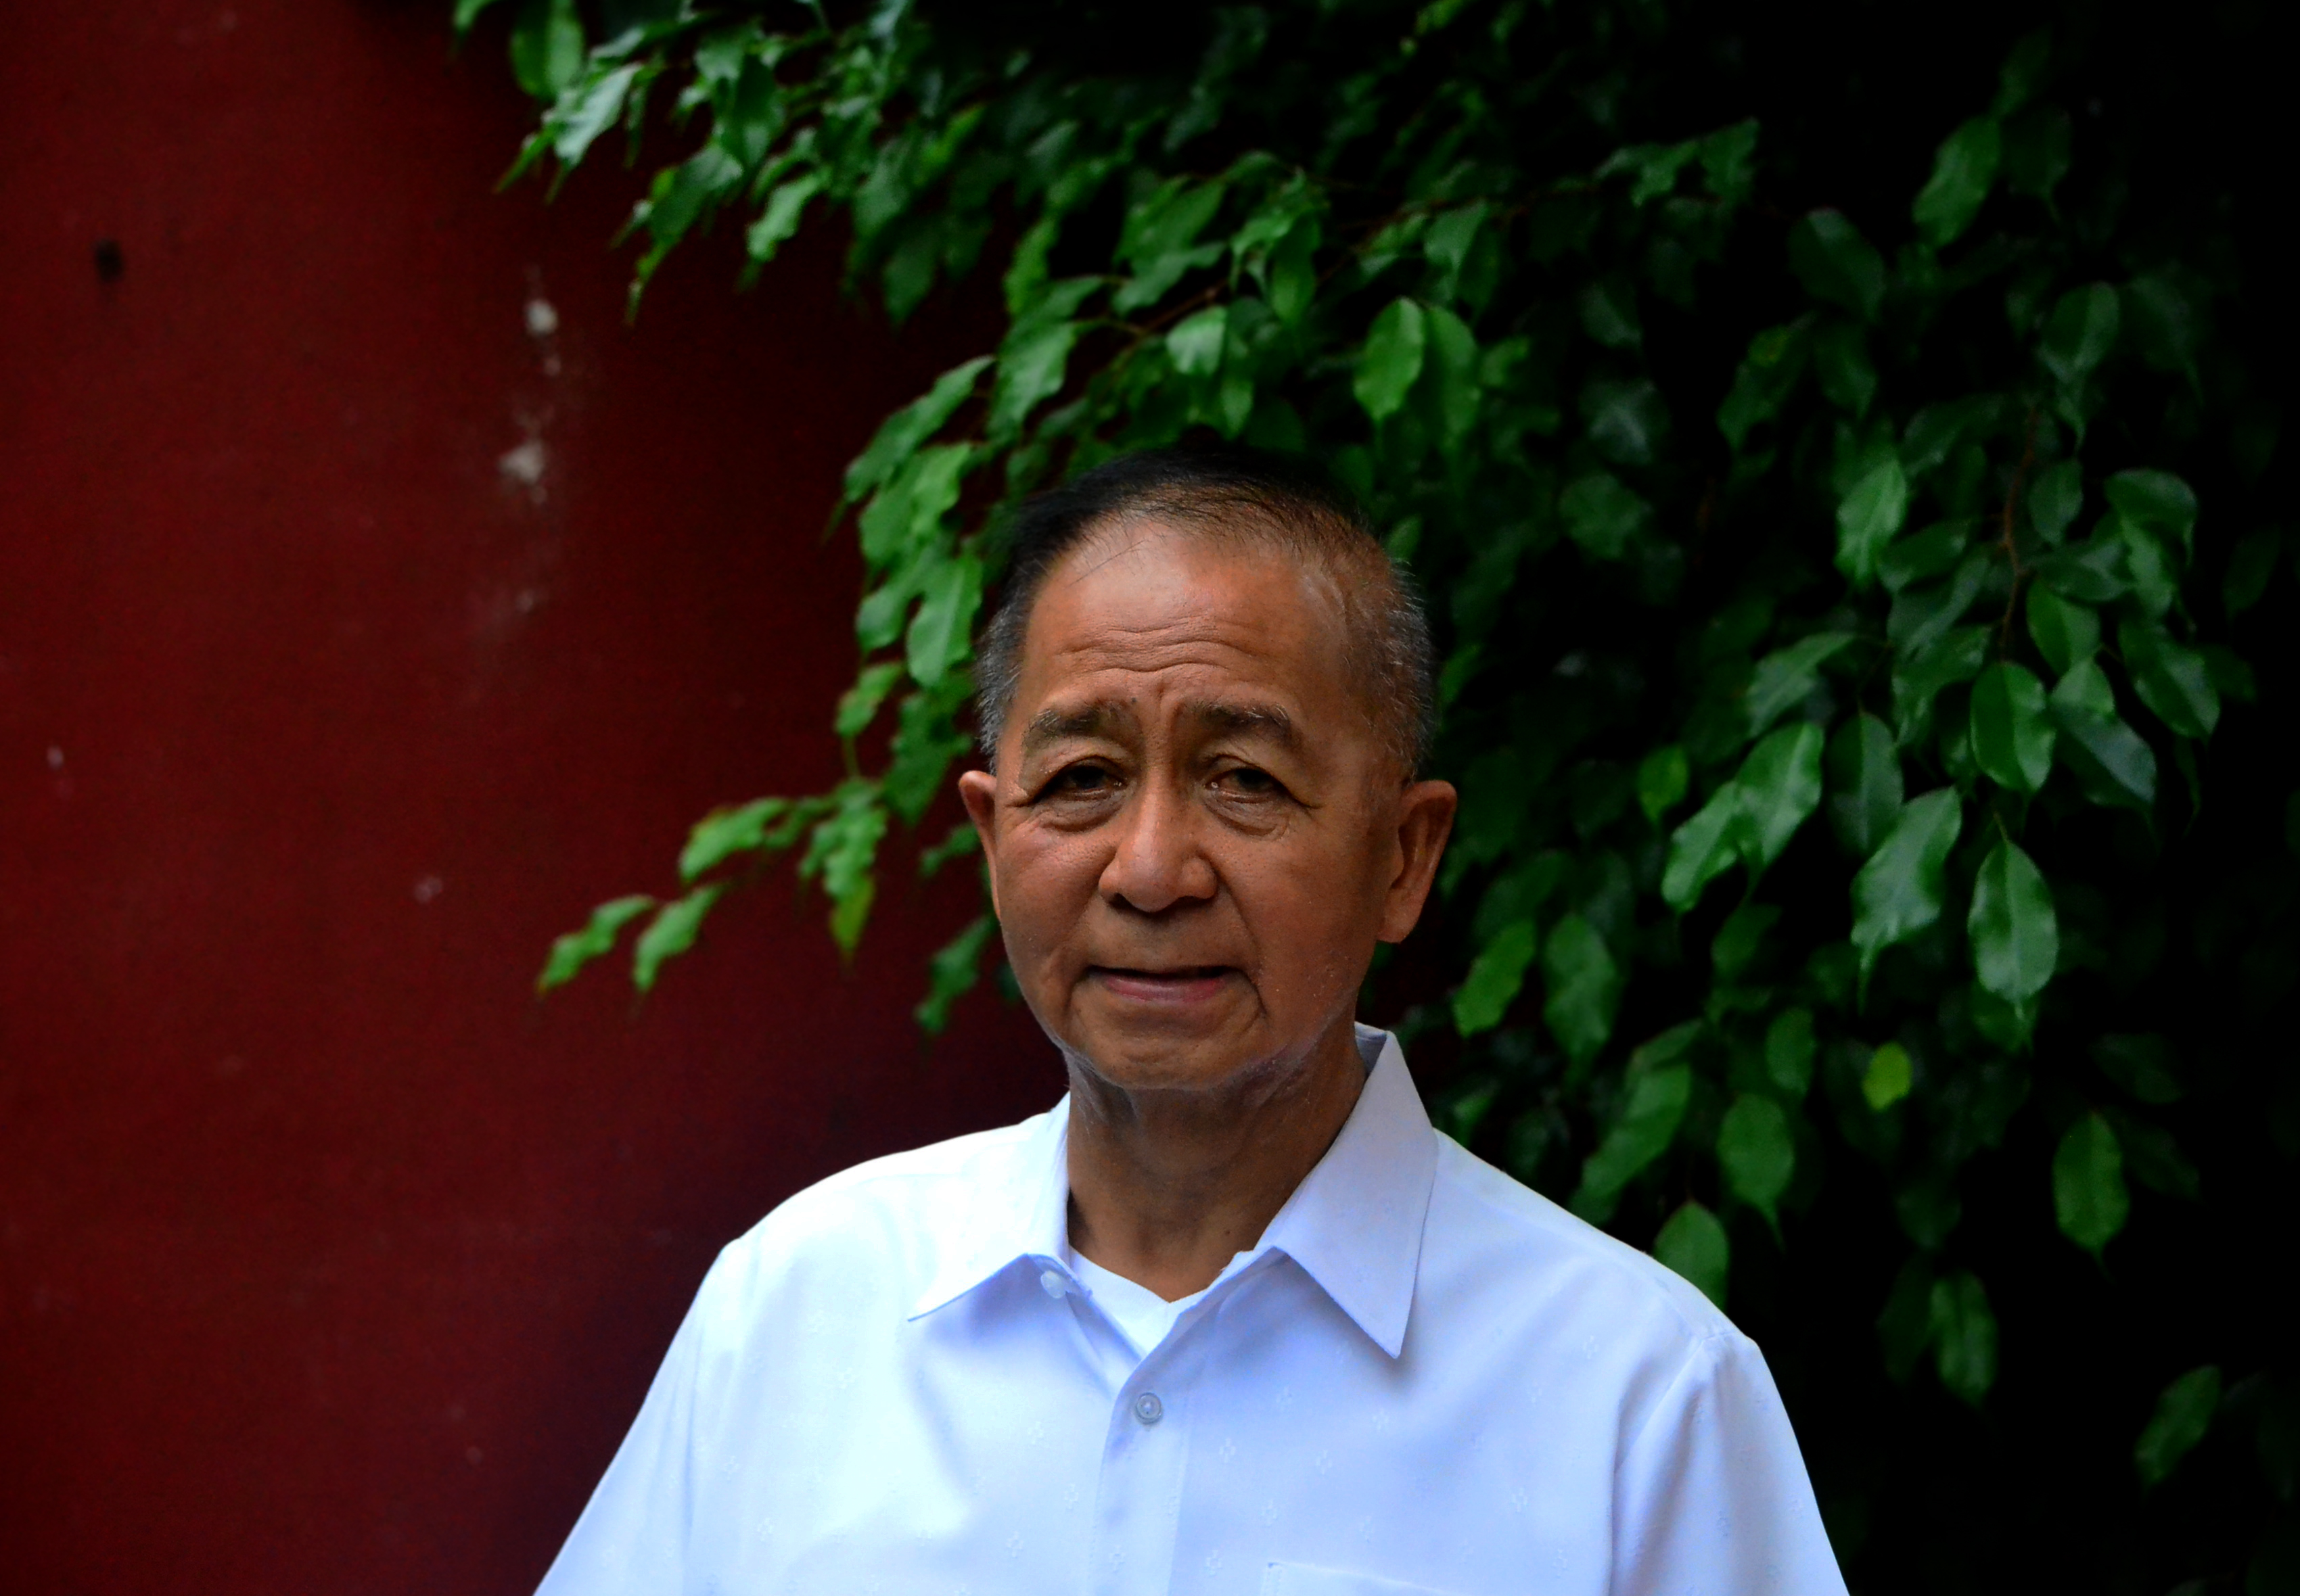 The man behind the farm is no less than Carlos Padilla Jr., the 75-year-old governor of the Philippine province of Nueva Vizcaya